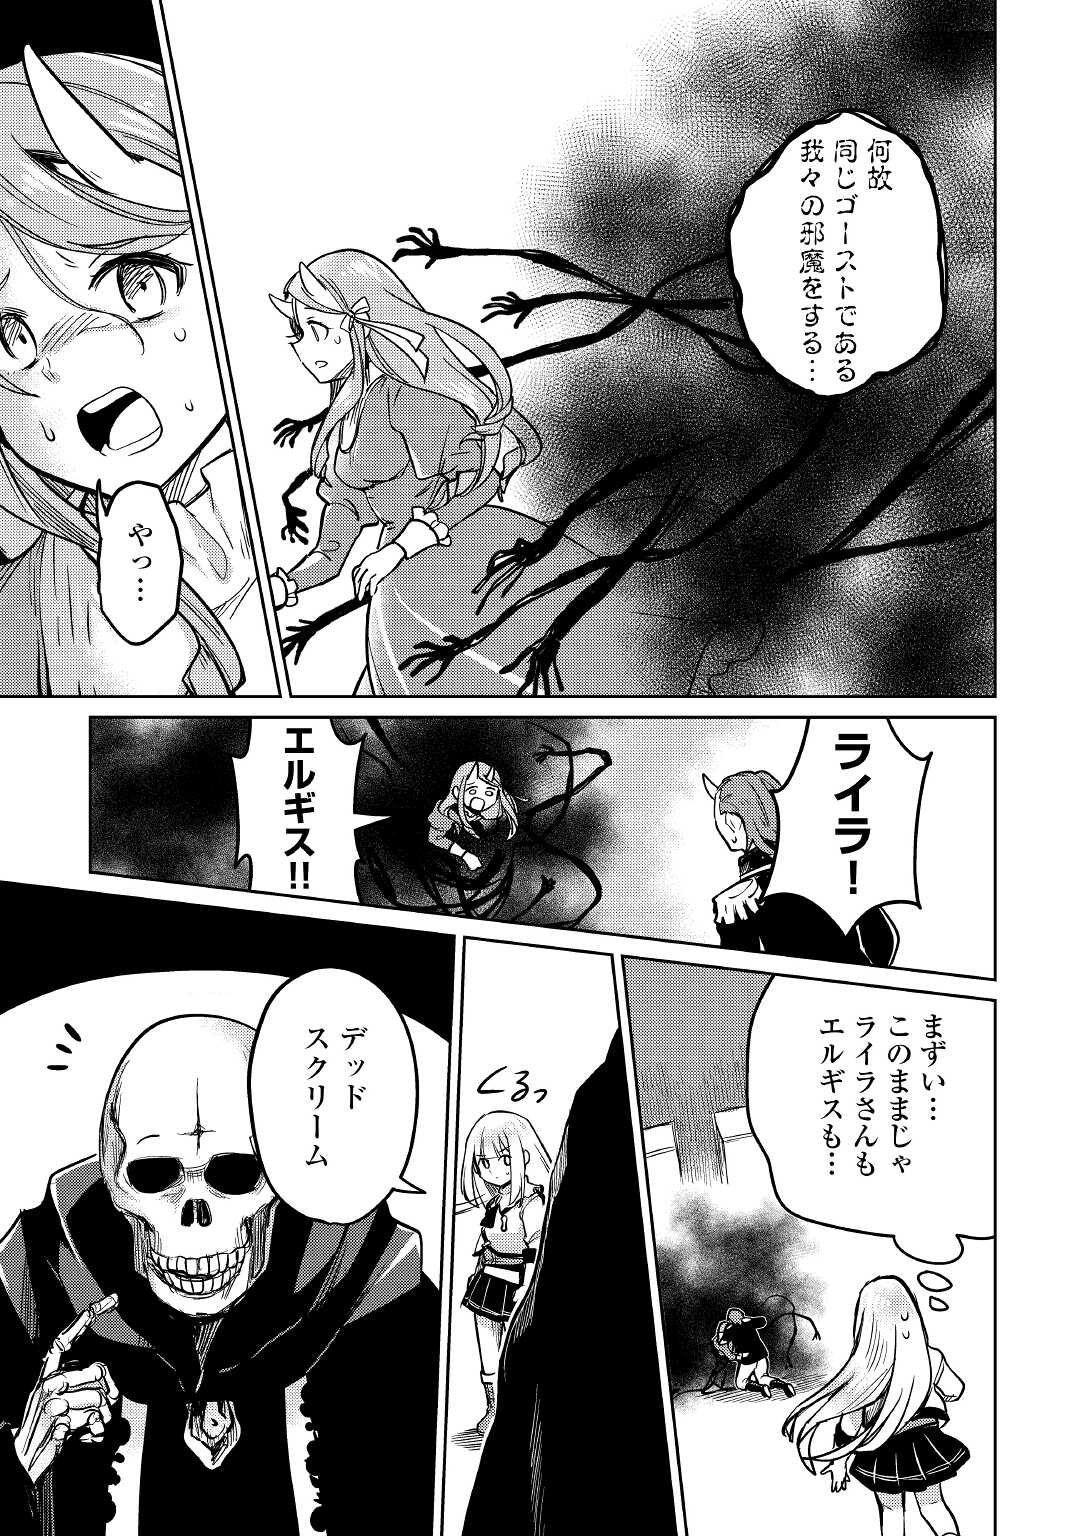 The Former Structural Researcher’s Story of Otherworldly Adventure 第40話 - Page 9